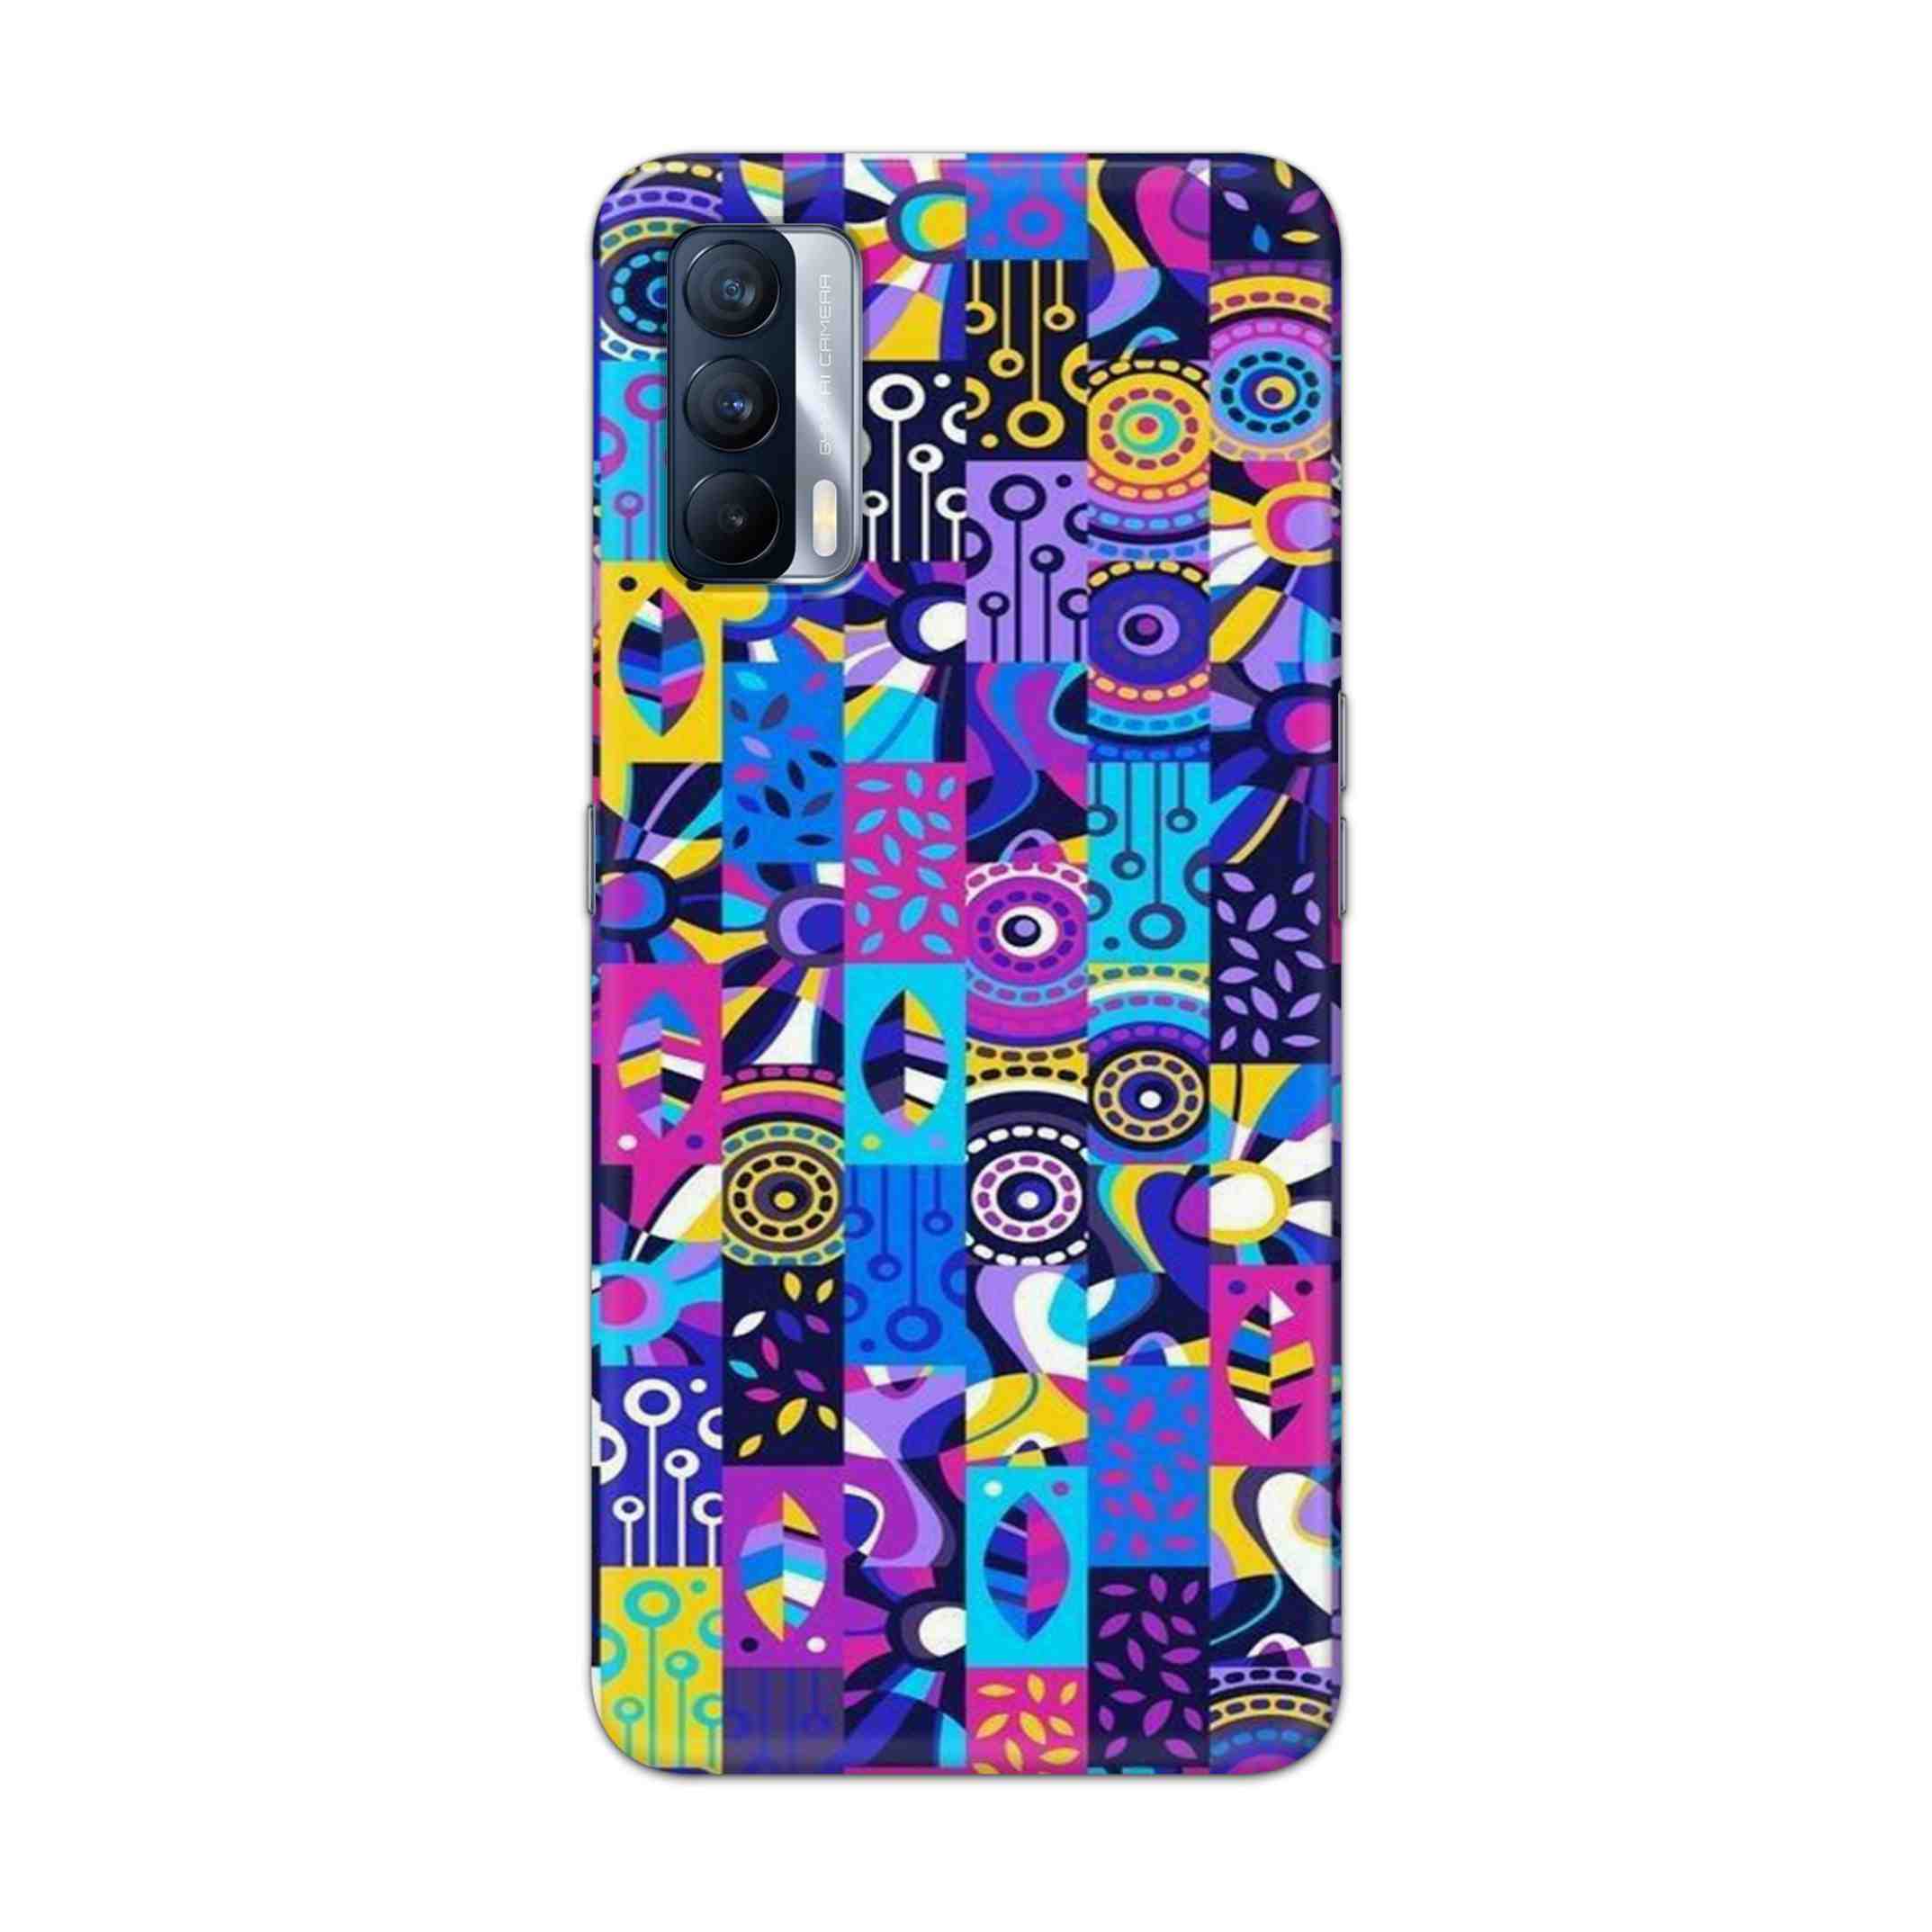 Buy Rainbow Art Hard Back Mobile Phone Case Cover For Realme X7 Online